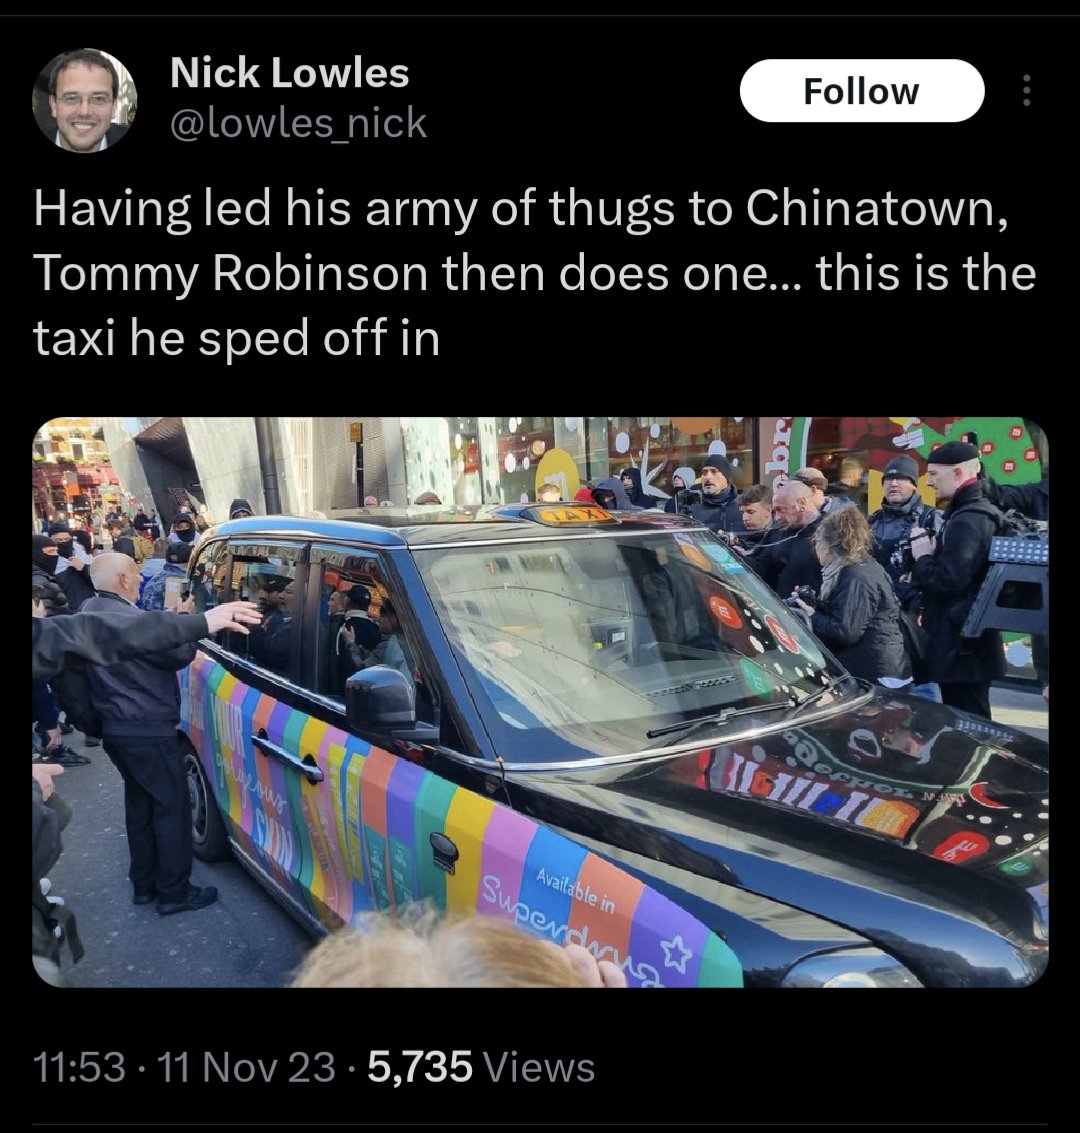 Tommy Robinson marched his 'lads' to famous Islamist hotbed, Chinatown, cops moved in and he shipped out in a black cab covered in Pride coloured livery abandoning his minions.